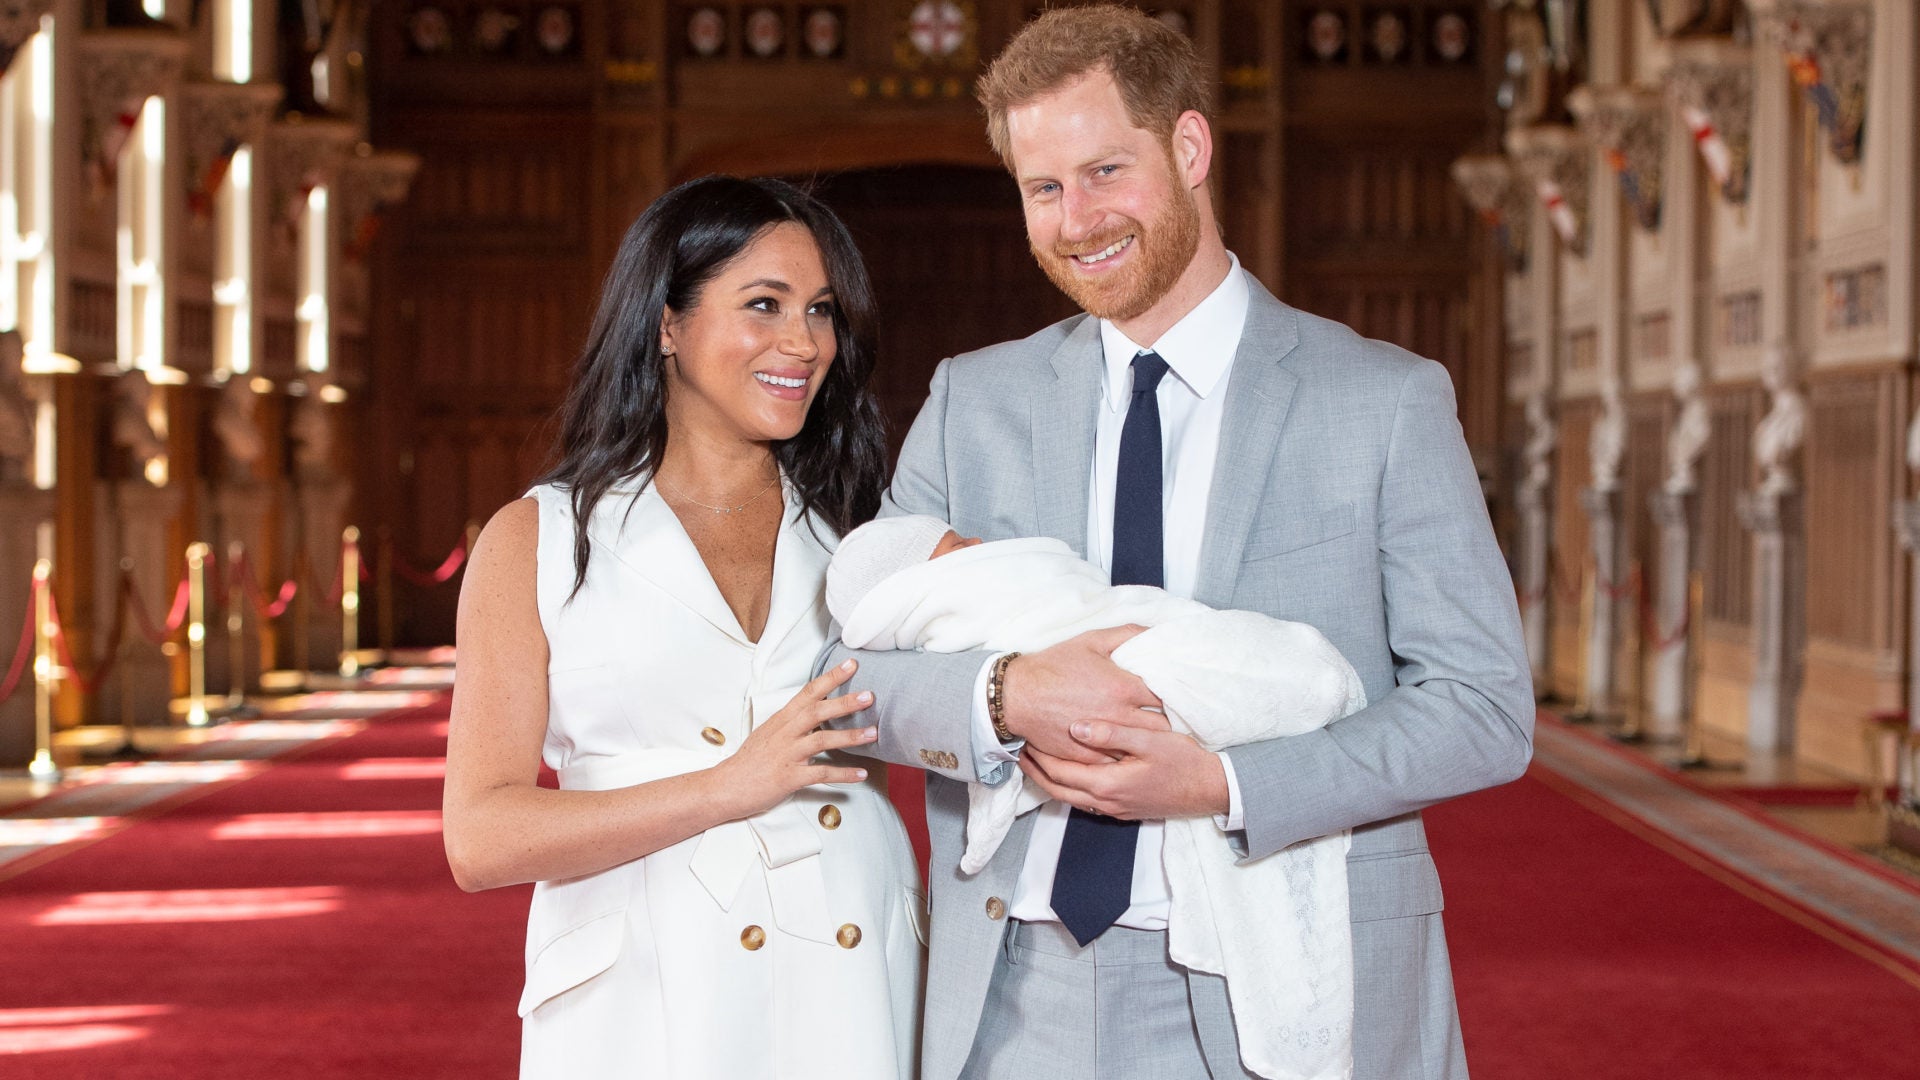 He's Here! Prince Harry and Meghan Markle Debut Their Baby Boy